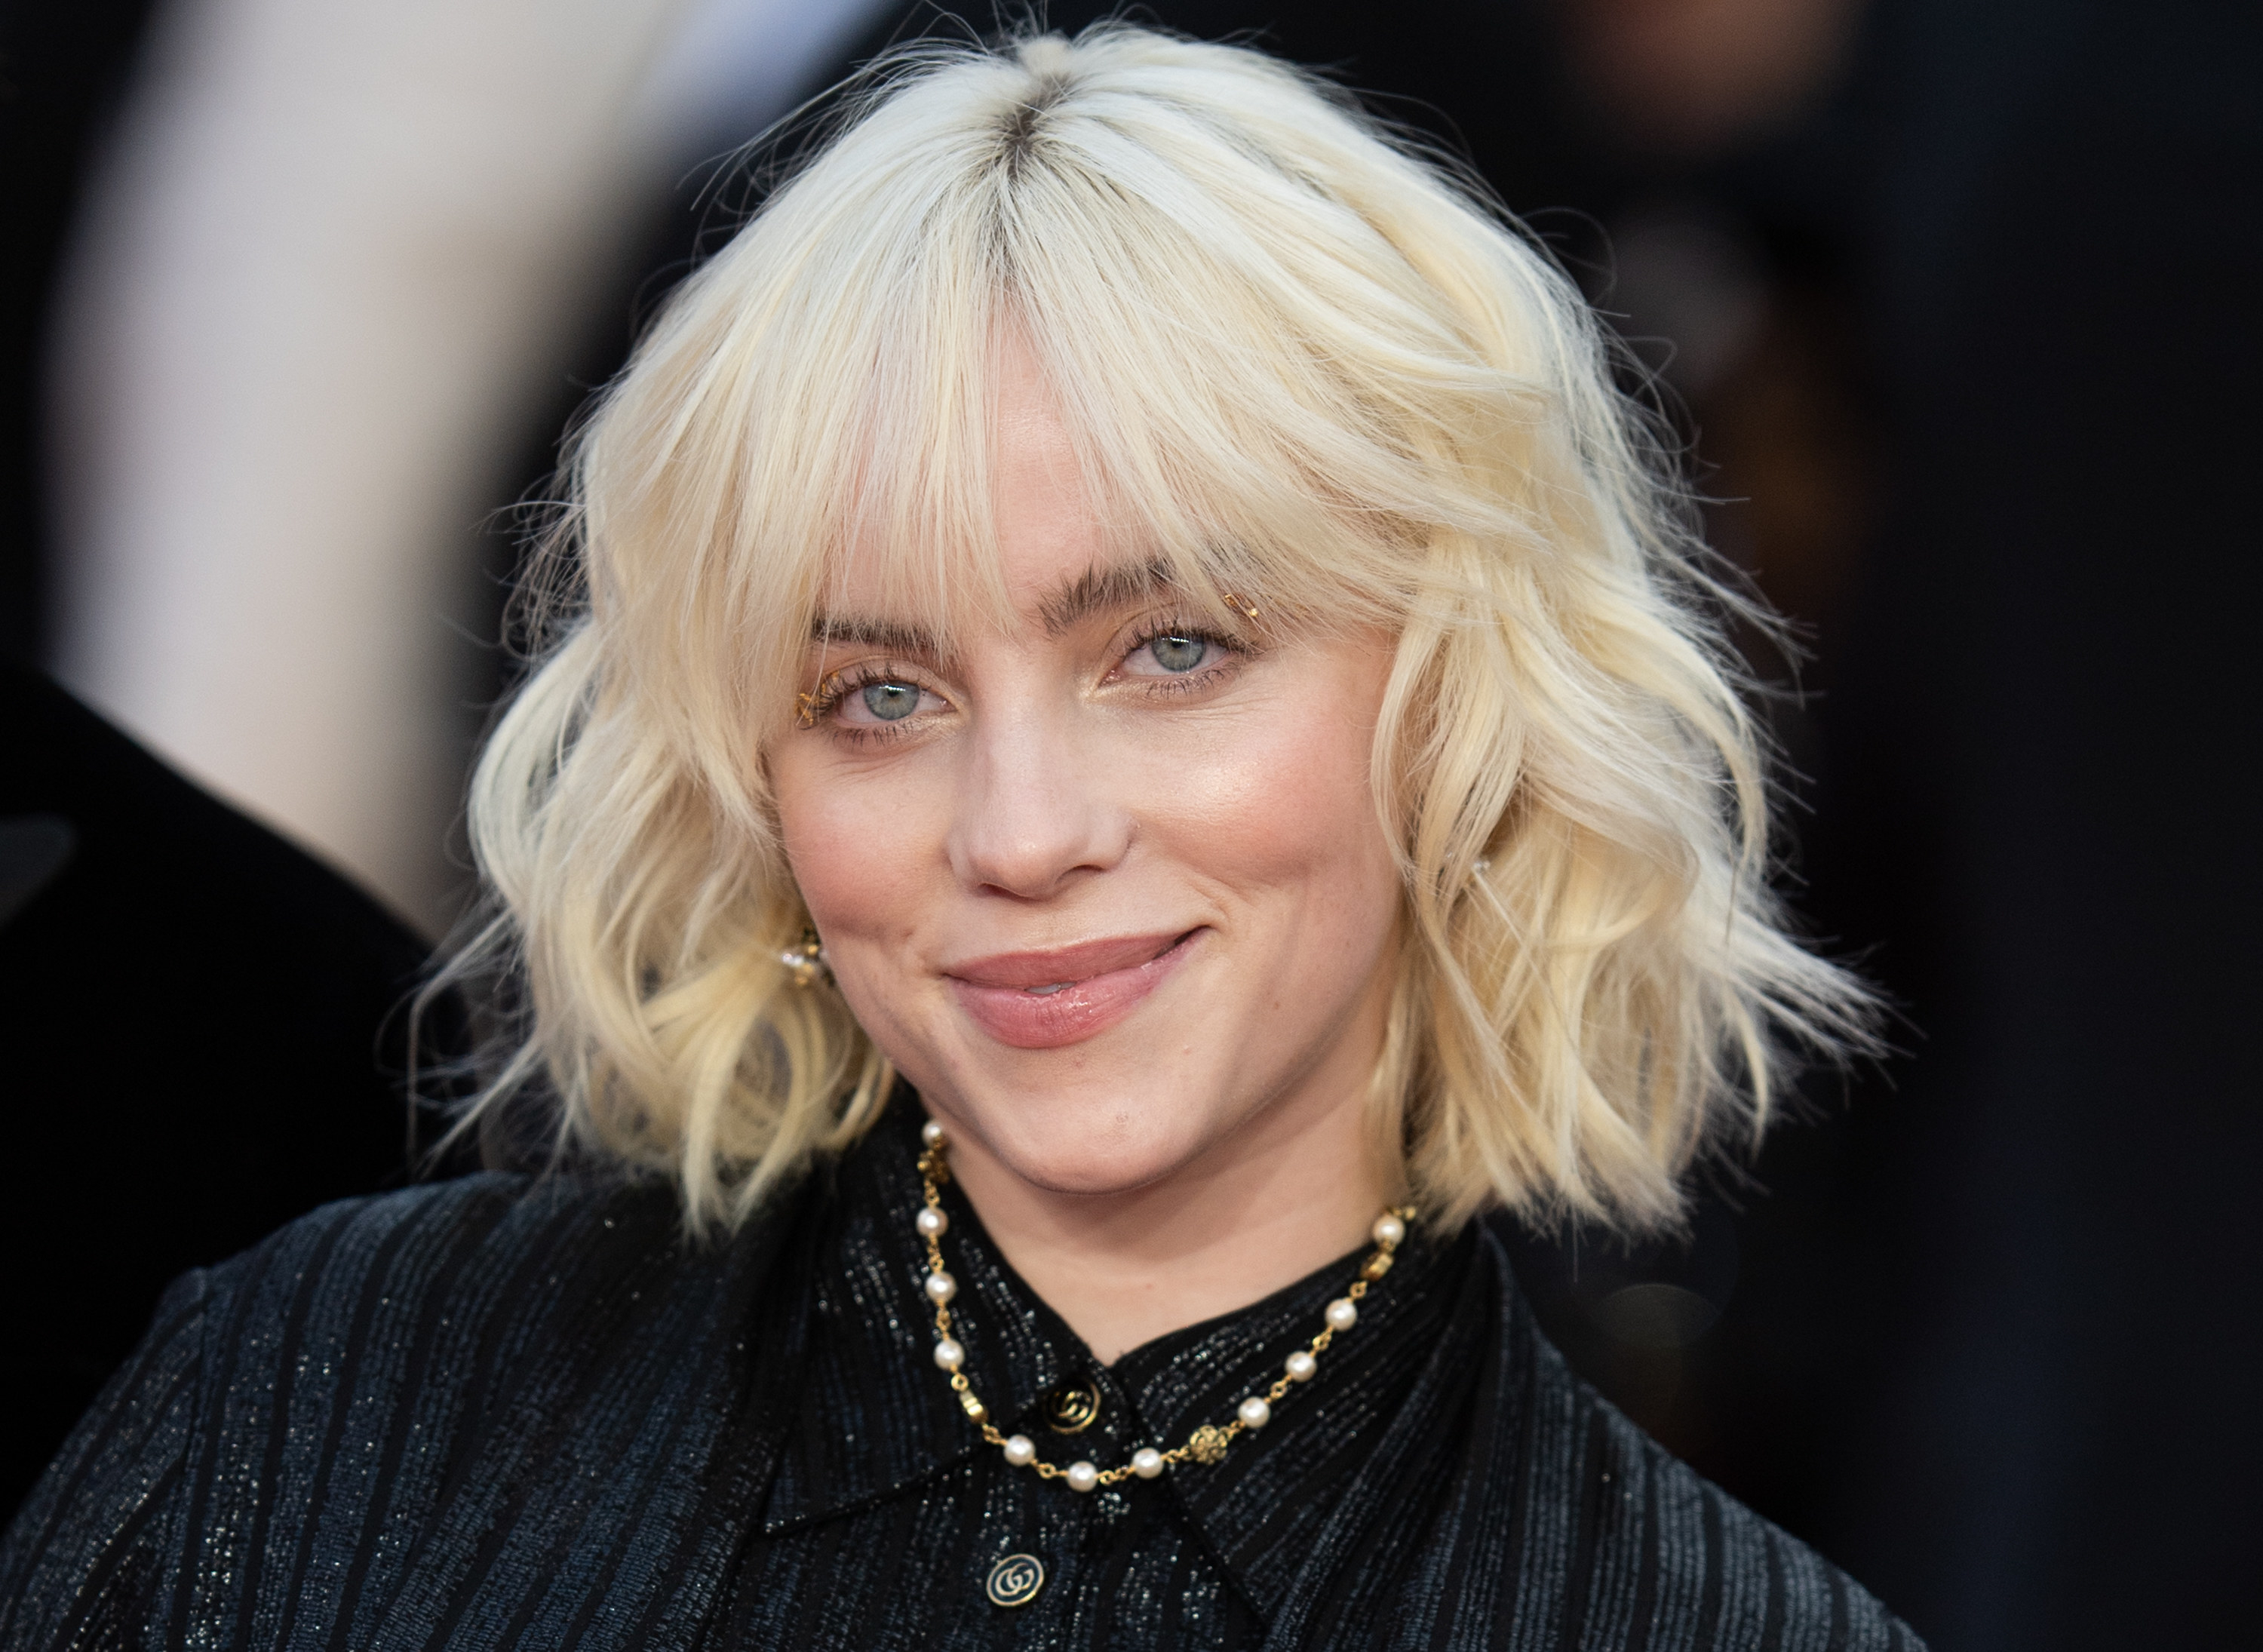 Billie Eilish attend the &quot;No Time To Die&quot; World Premiere at Royal Albert Hall on September 28, 2021